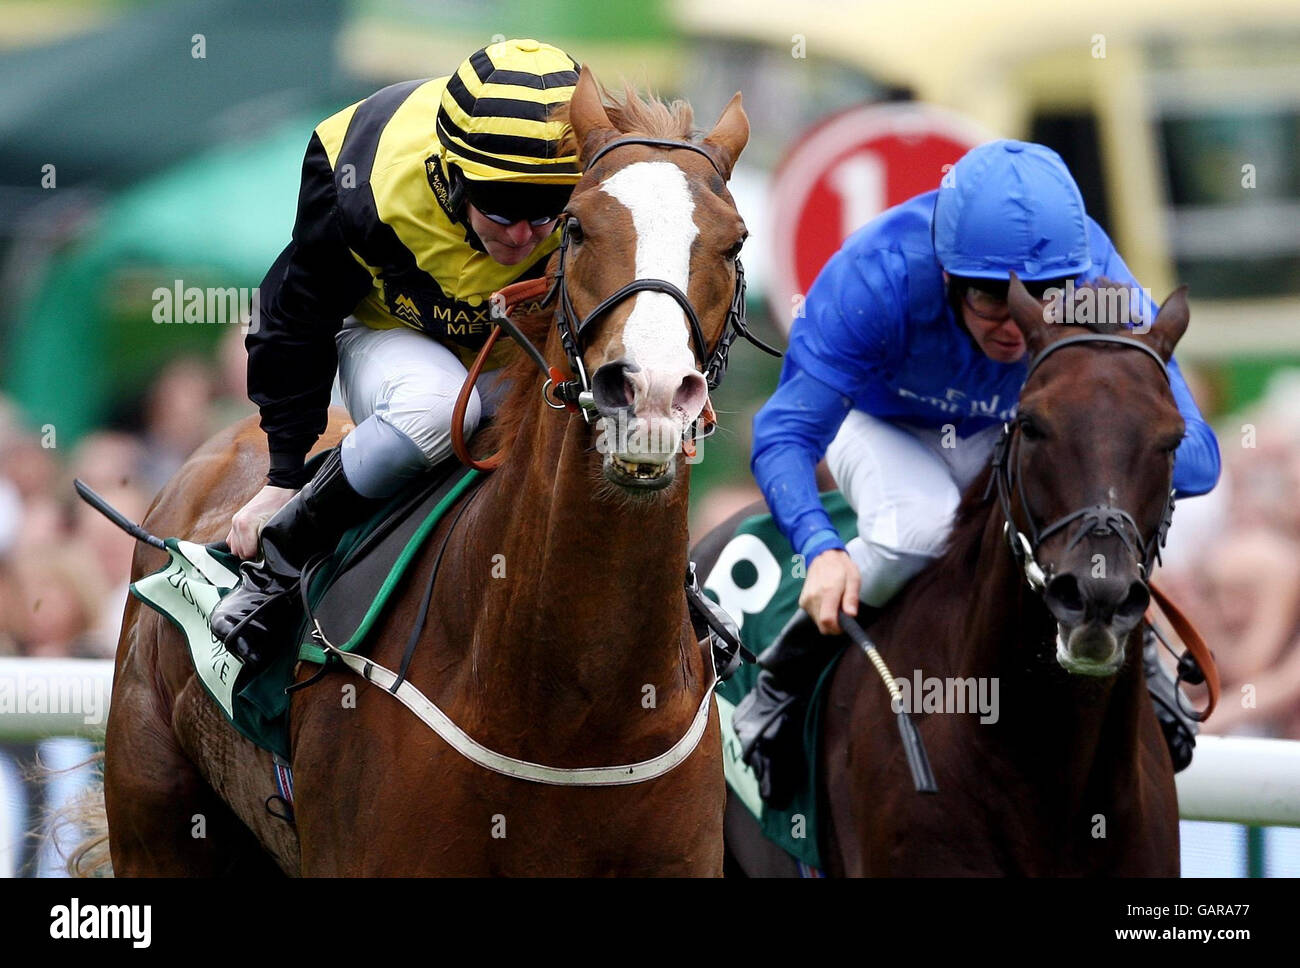 Horse Racing - The 2008 Derby Festival - Ladies Day - Epsom Downs Racecourse. Blythe Knight and jockey Graham Gibbons (Yellow & Black colours) wins the Juddmonte Diomed Stakes at Epsom Downs Racecourse, Surrey. Stock Photo